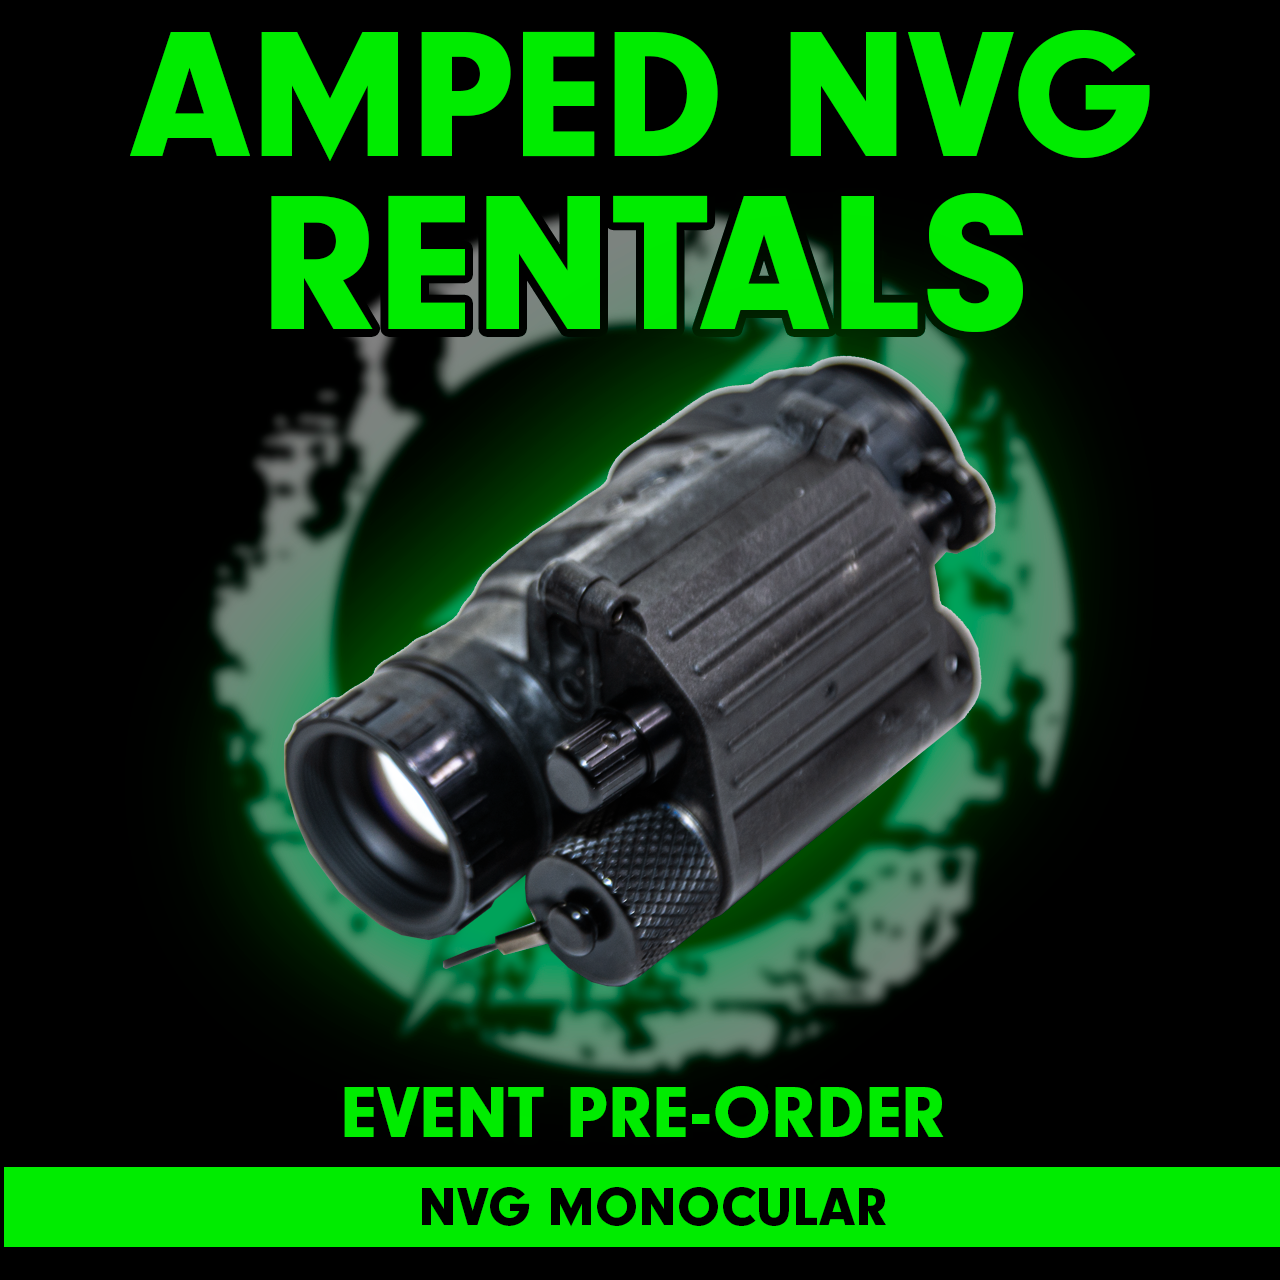 Amped Airsoft NVG Rental Veterans for Airsoft OP Ironhawk | OCT 6 - 8 